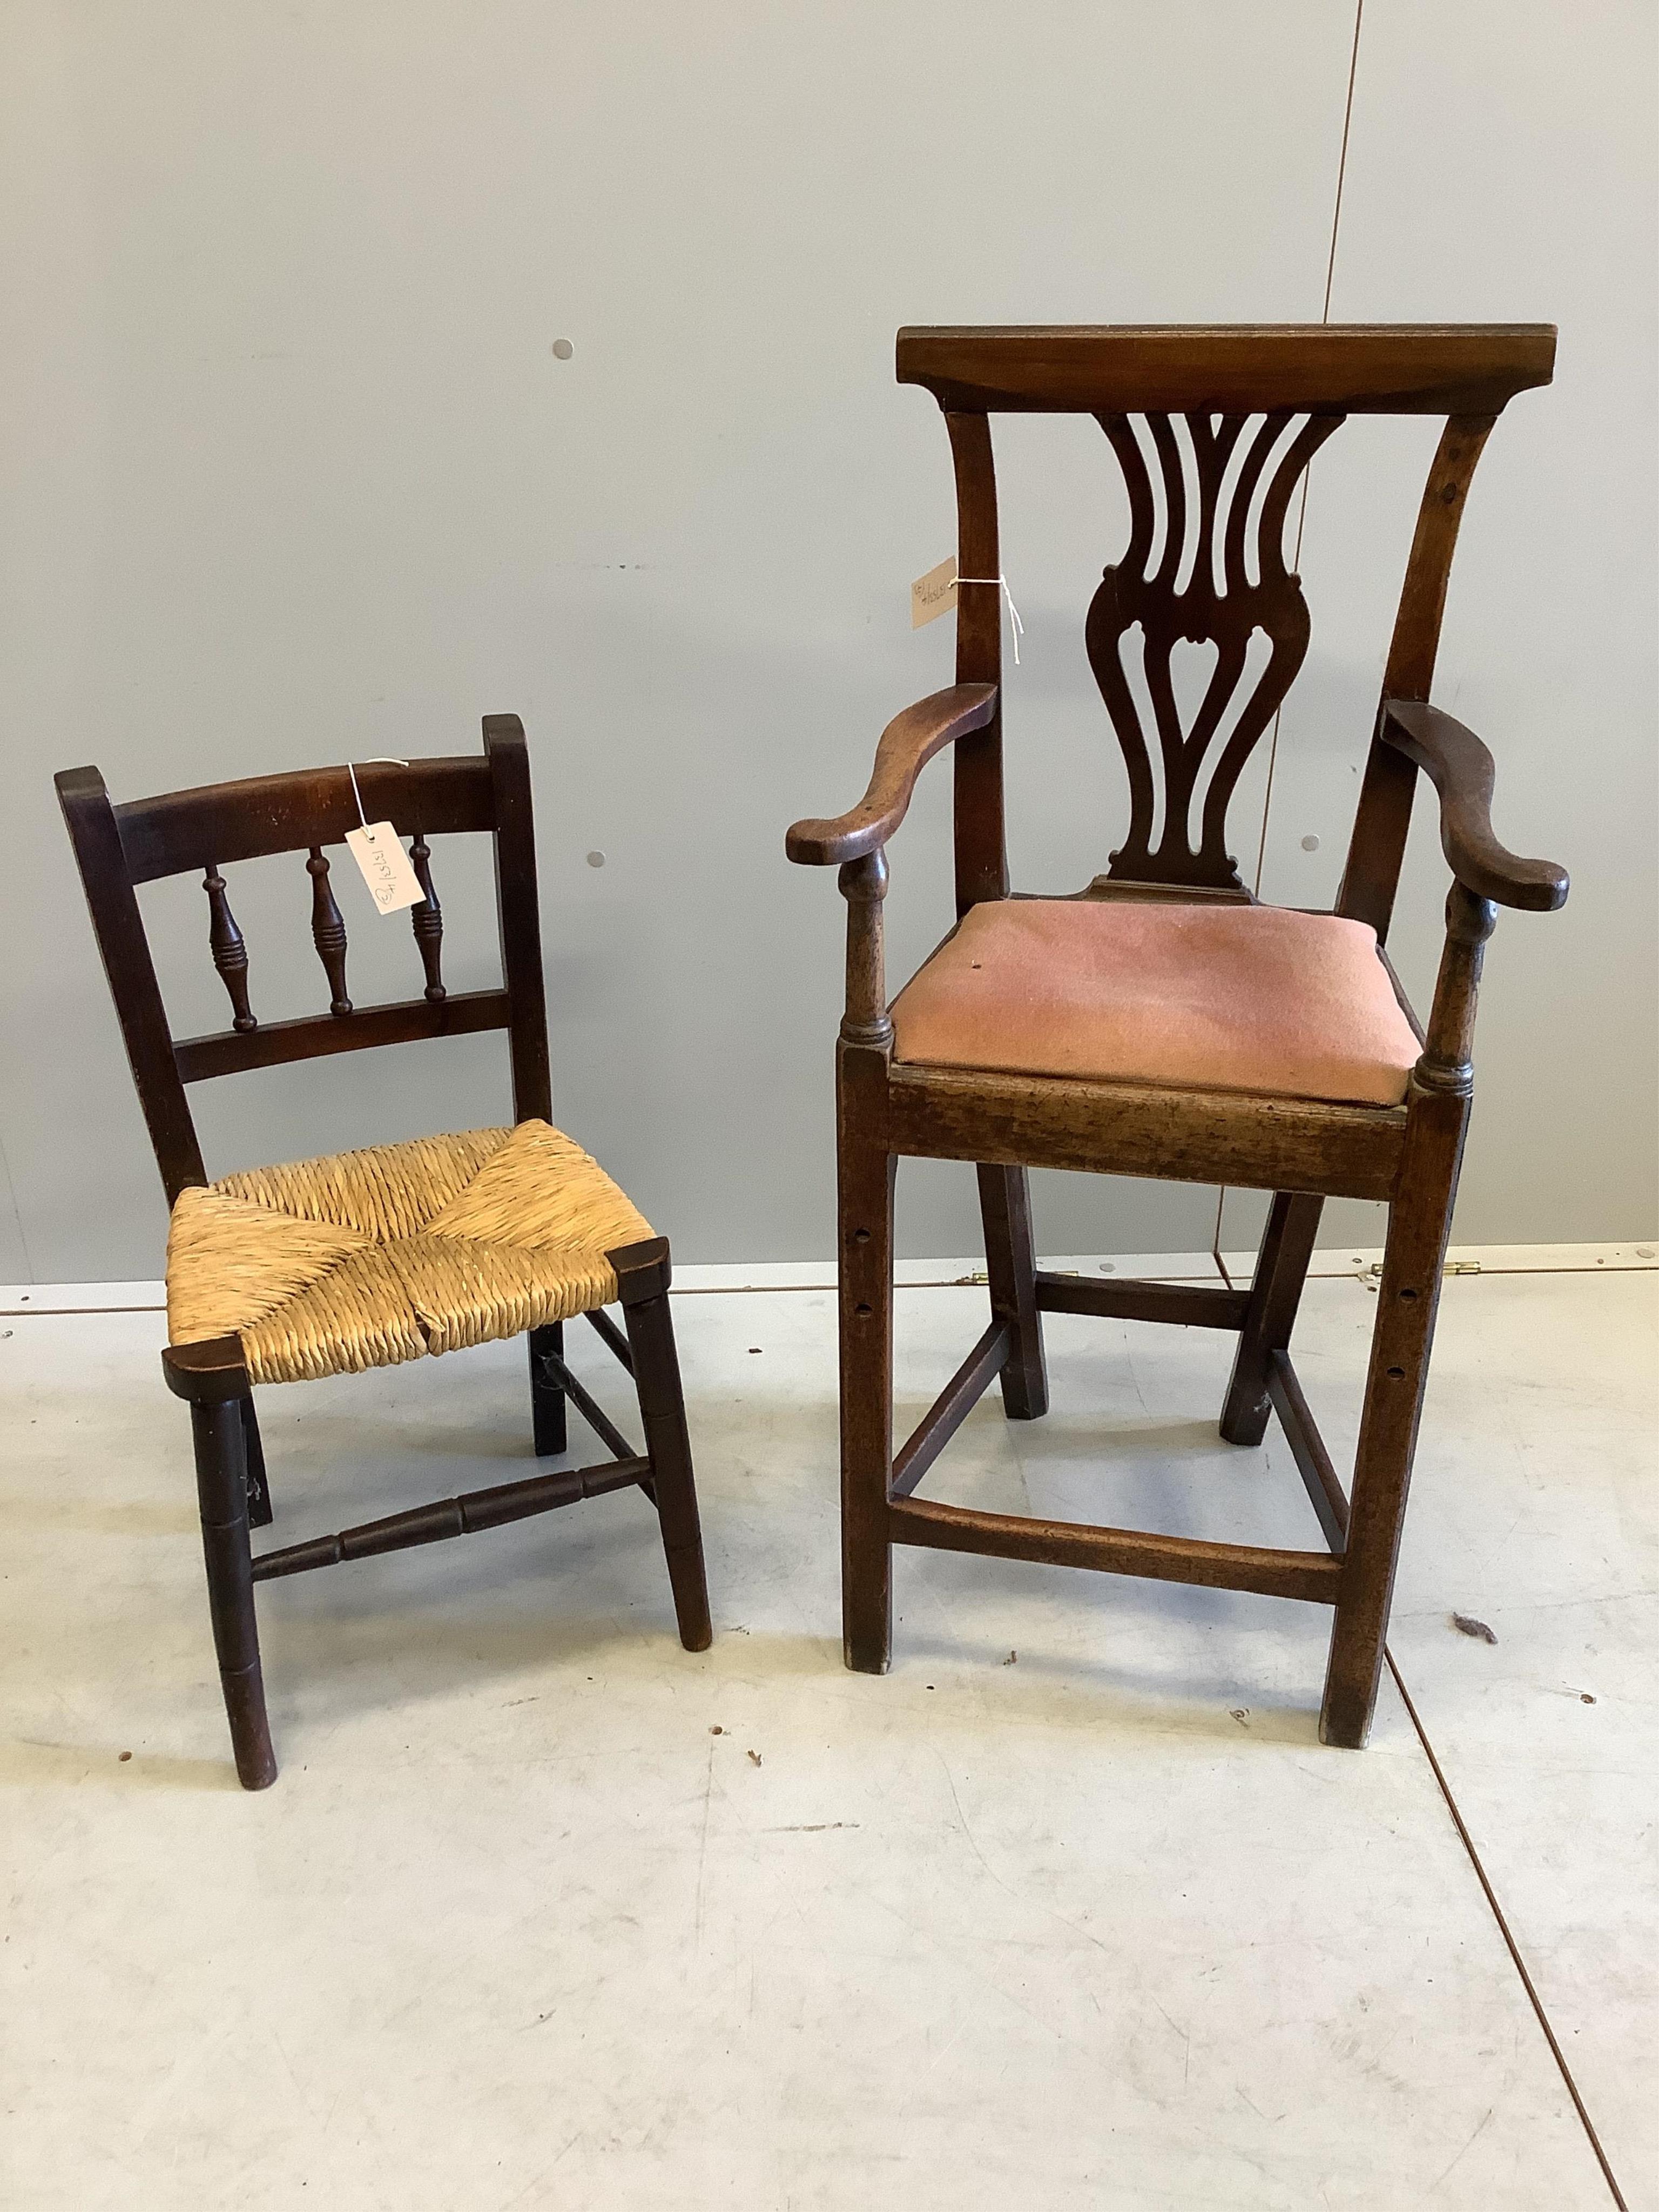 A late 18th / early 19th century child's mahogany correction / high chair, having scrolled arms, drop-in seat and vase splat, height 94cm together with a 19th century beech rush seated child's chair. Condition - fair